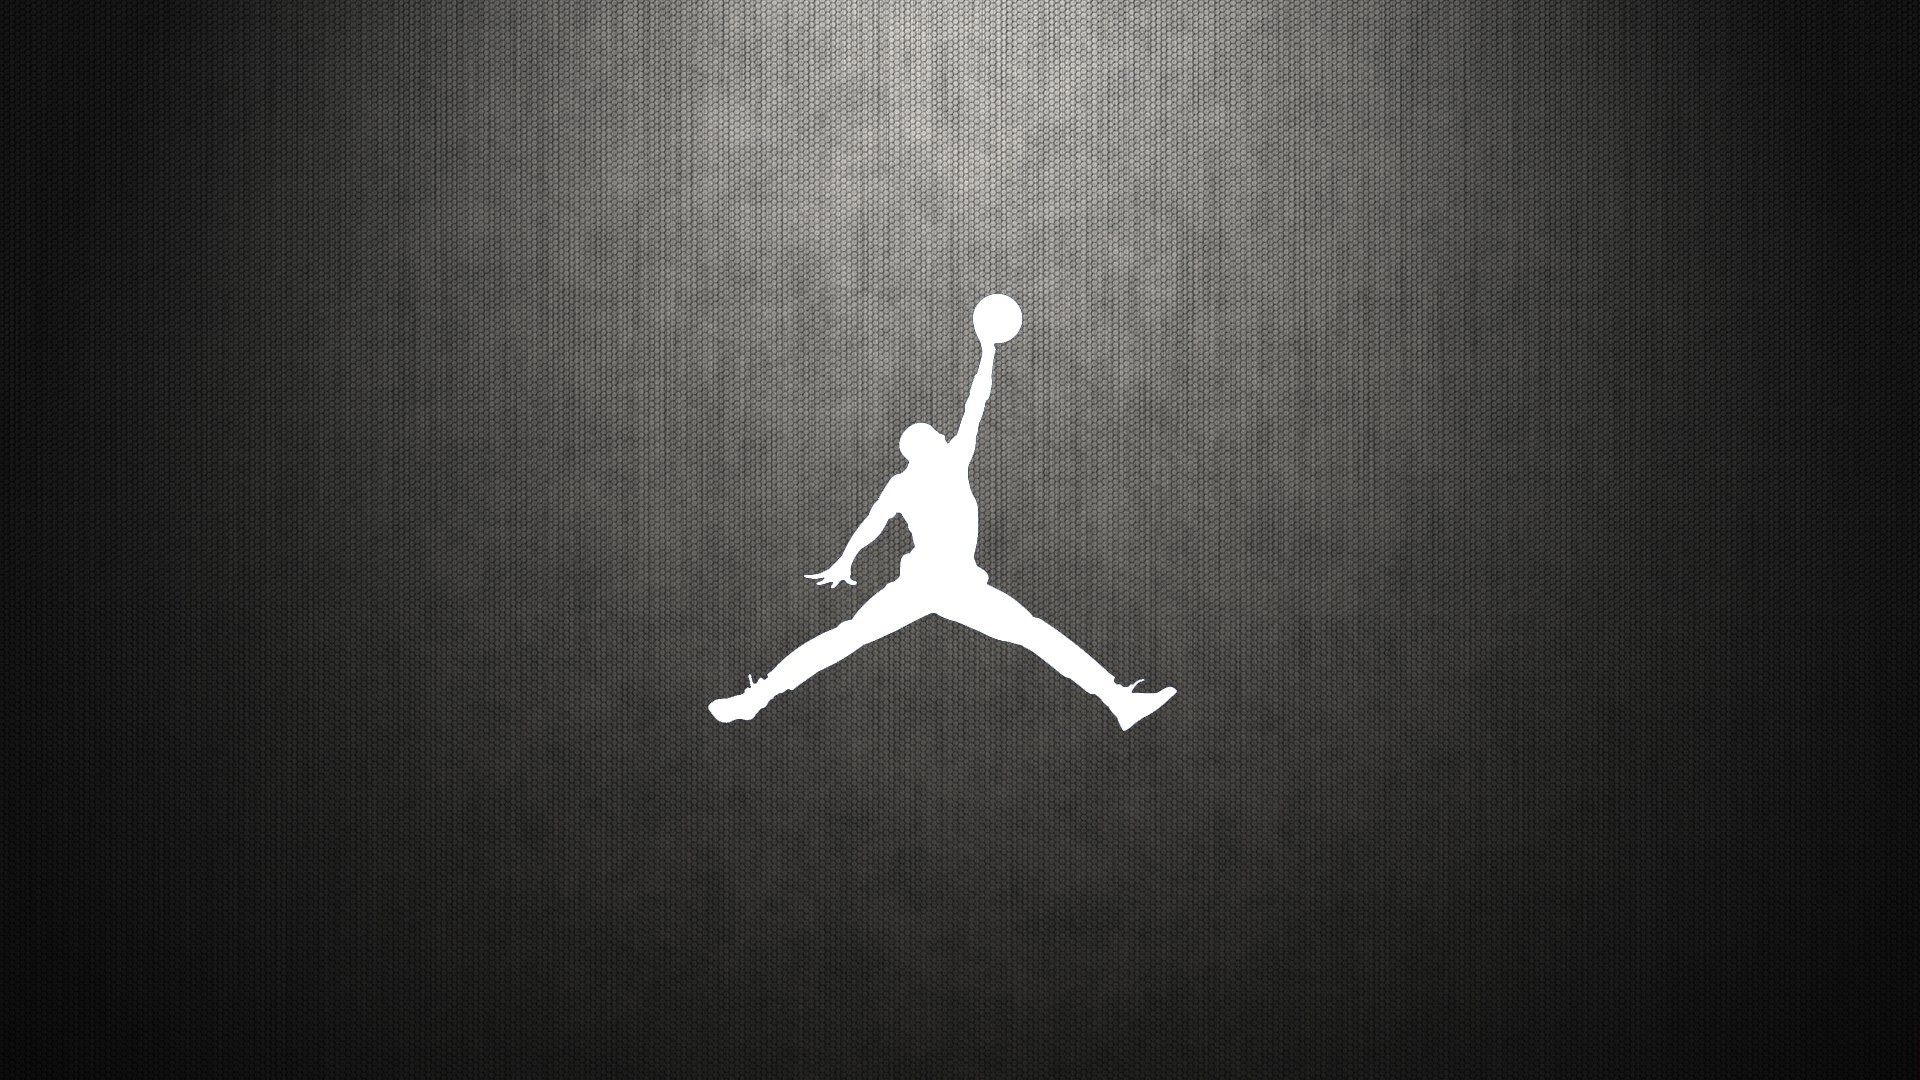 Free download Nike Basketball HD PC Wallpaper 3626 Amazing Wallpaperz [1920x1080] for your Desktop, Mobile & Tablet. Explore Nike Basketball Wallpaper. Cool Nike Wallpaper, Basketball Court Wallpaper, Nike Money Wallpaper